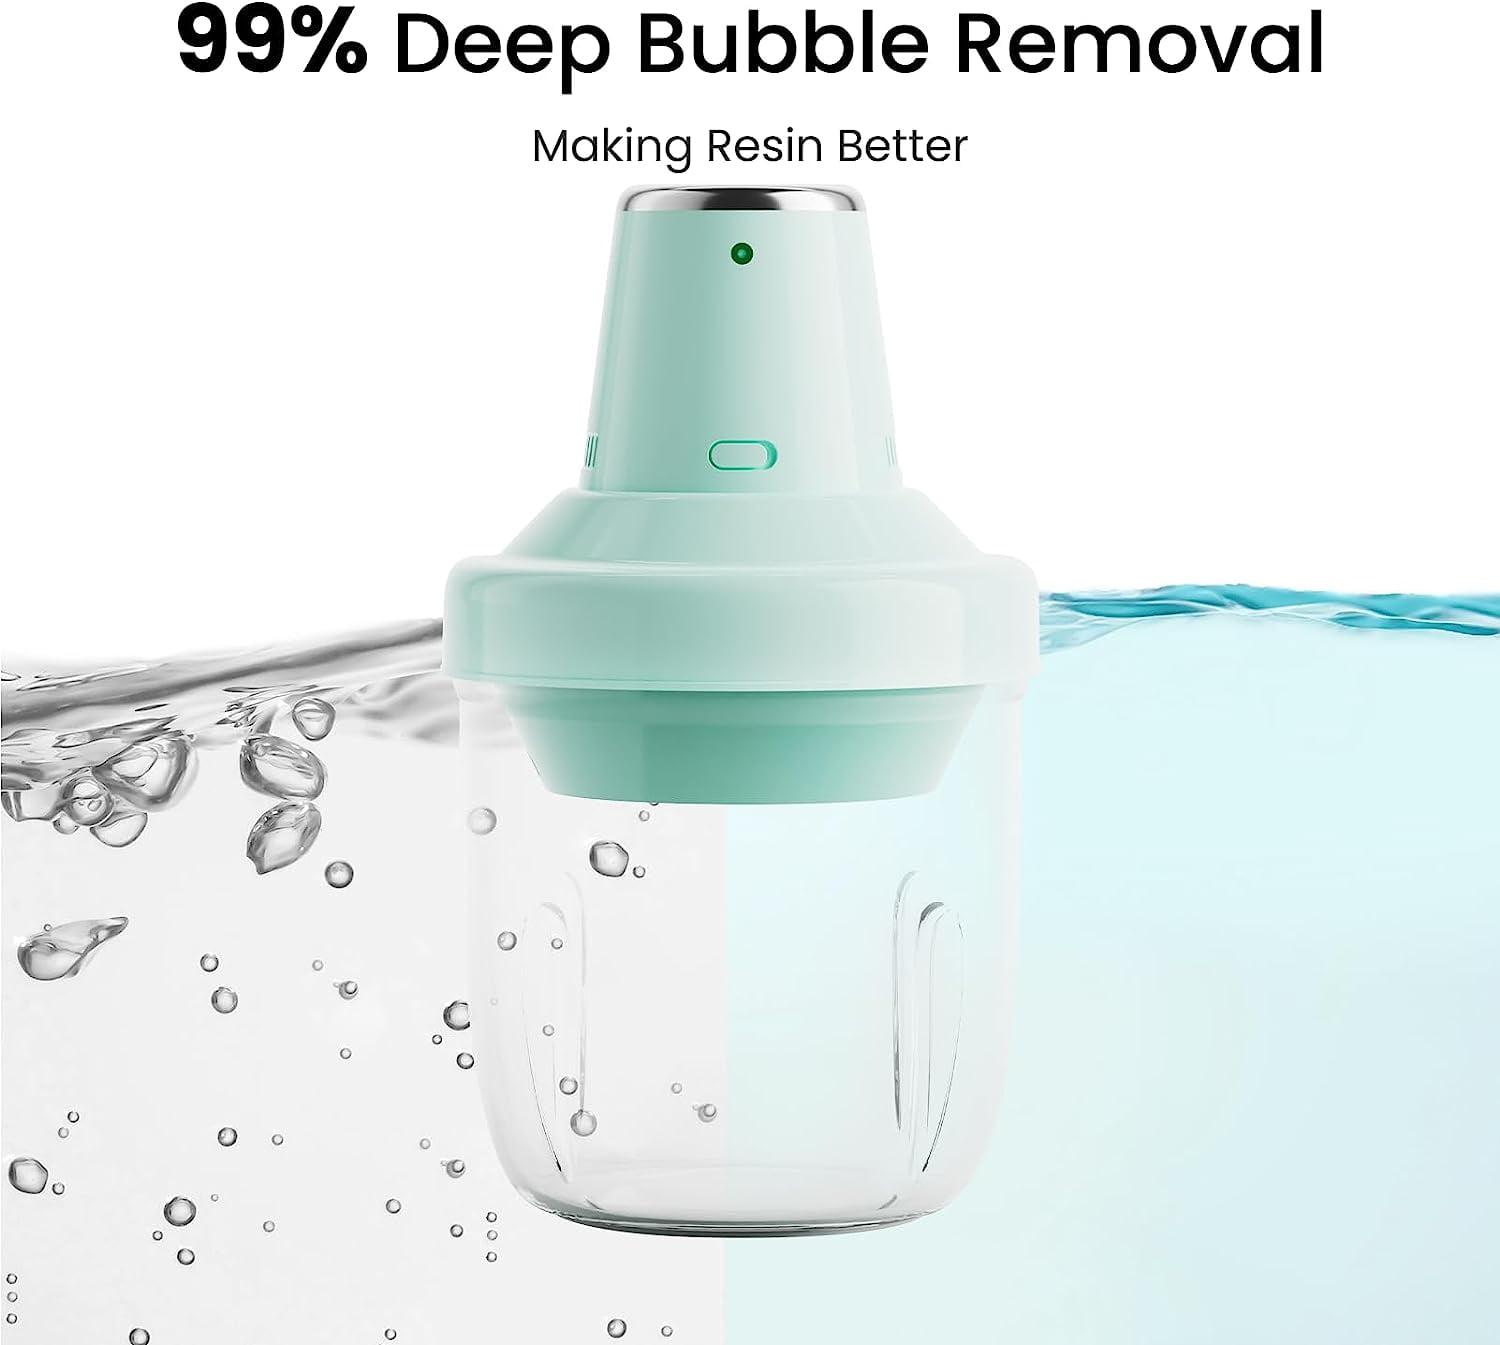  Resin Bubble Remover, Faster Remove Bubbles Within